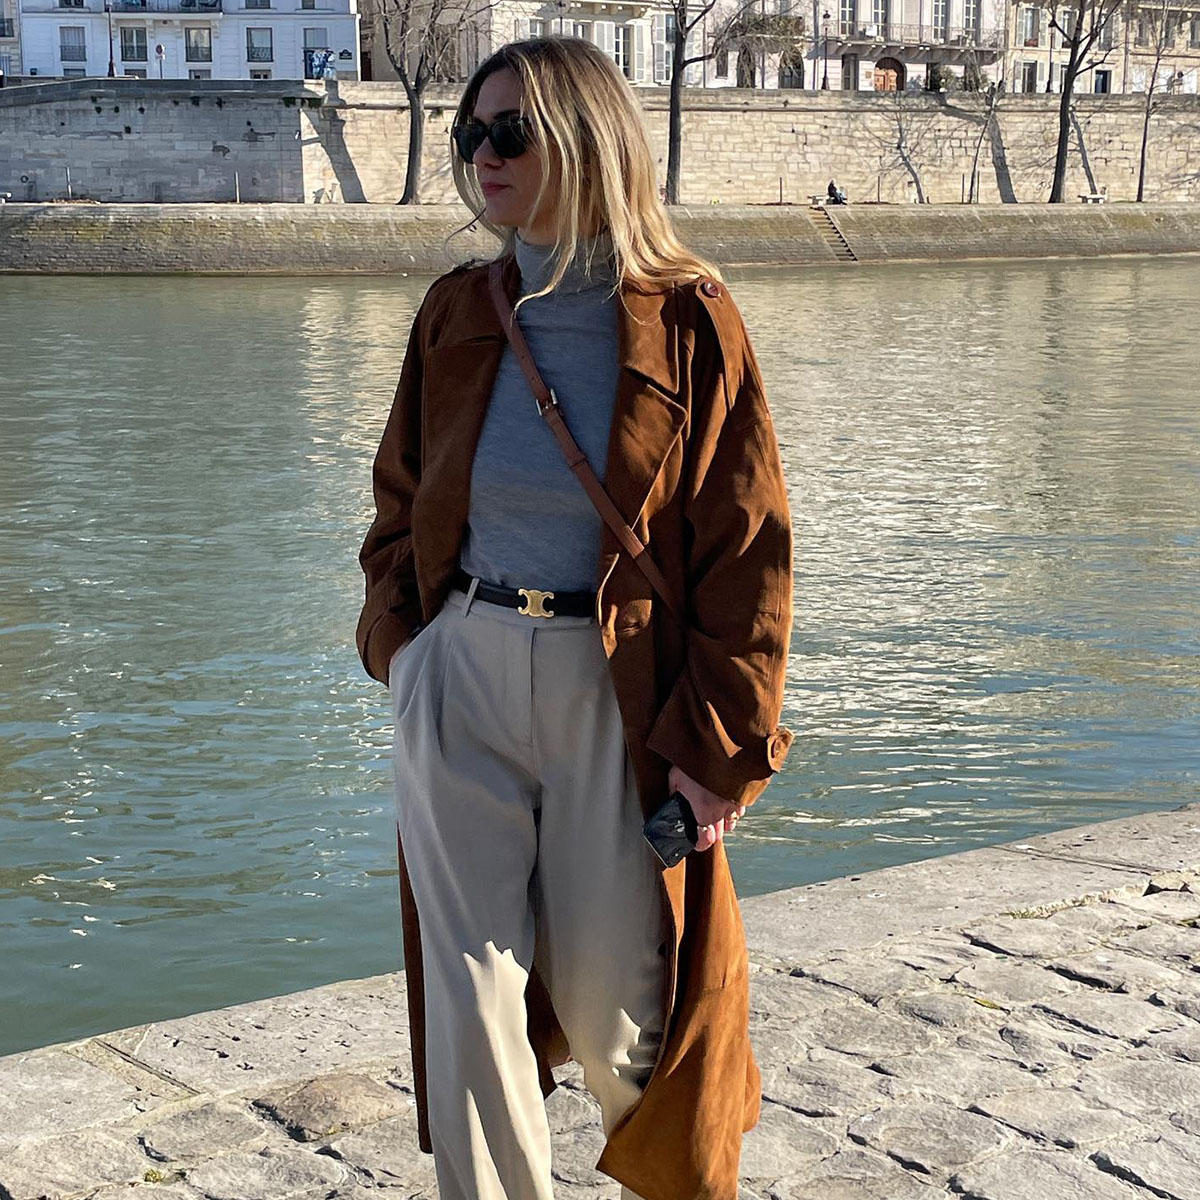 How to Style Baggy Pants for Women Like the Fashion Crowd